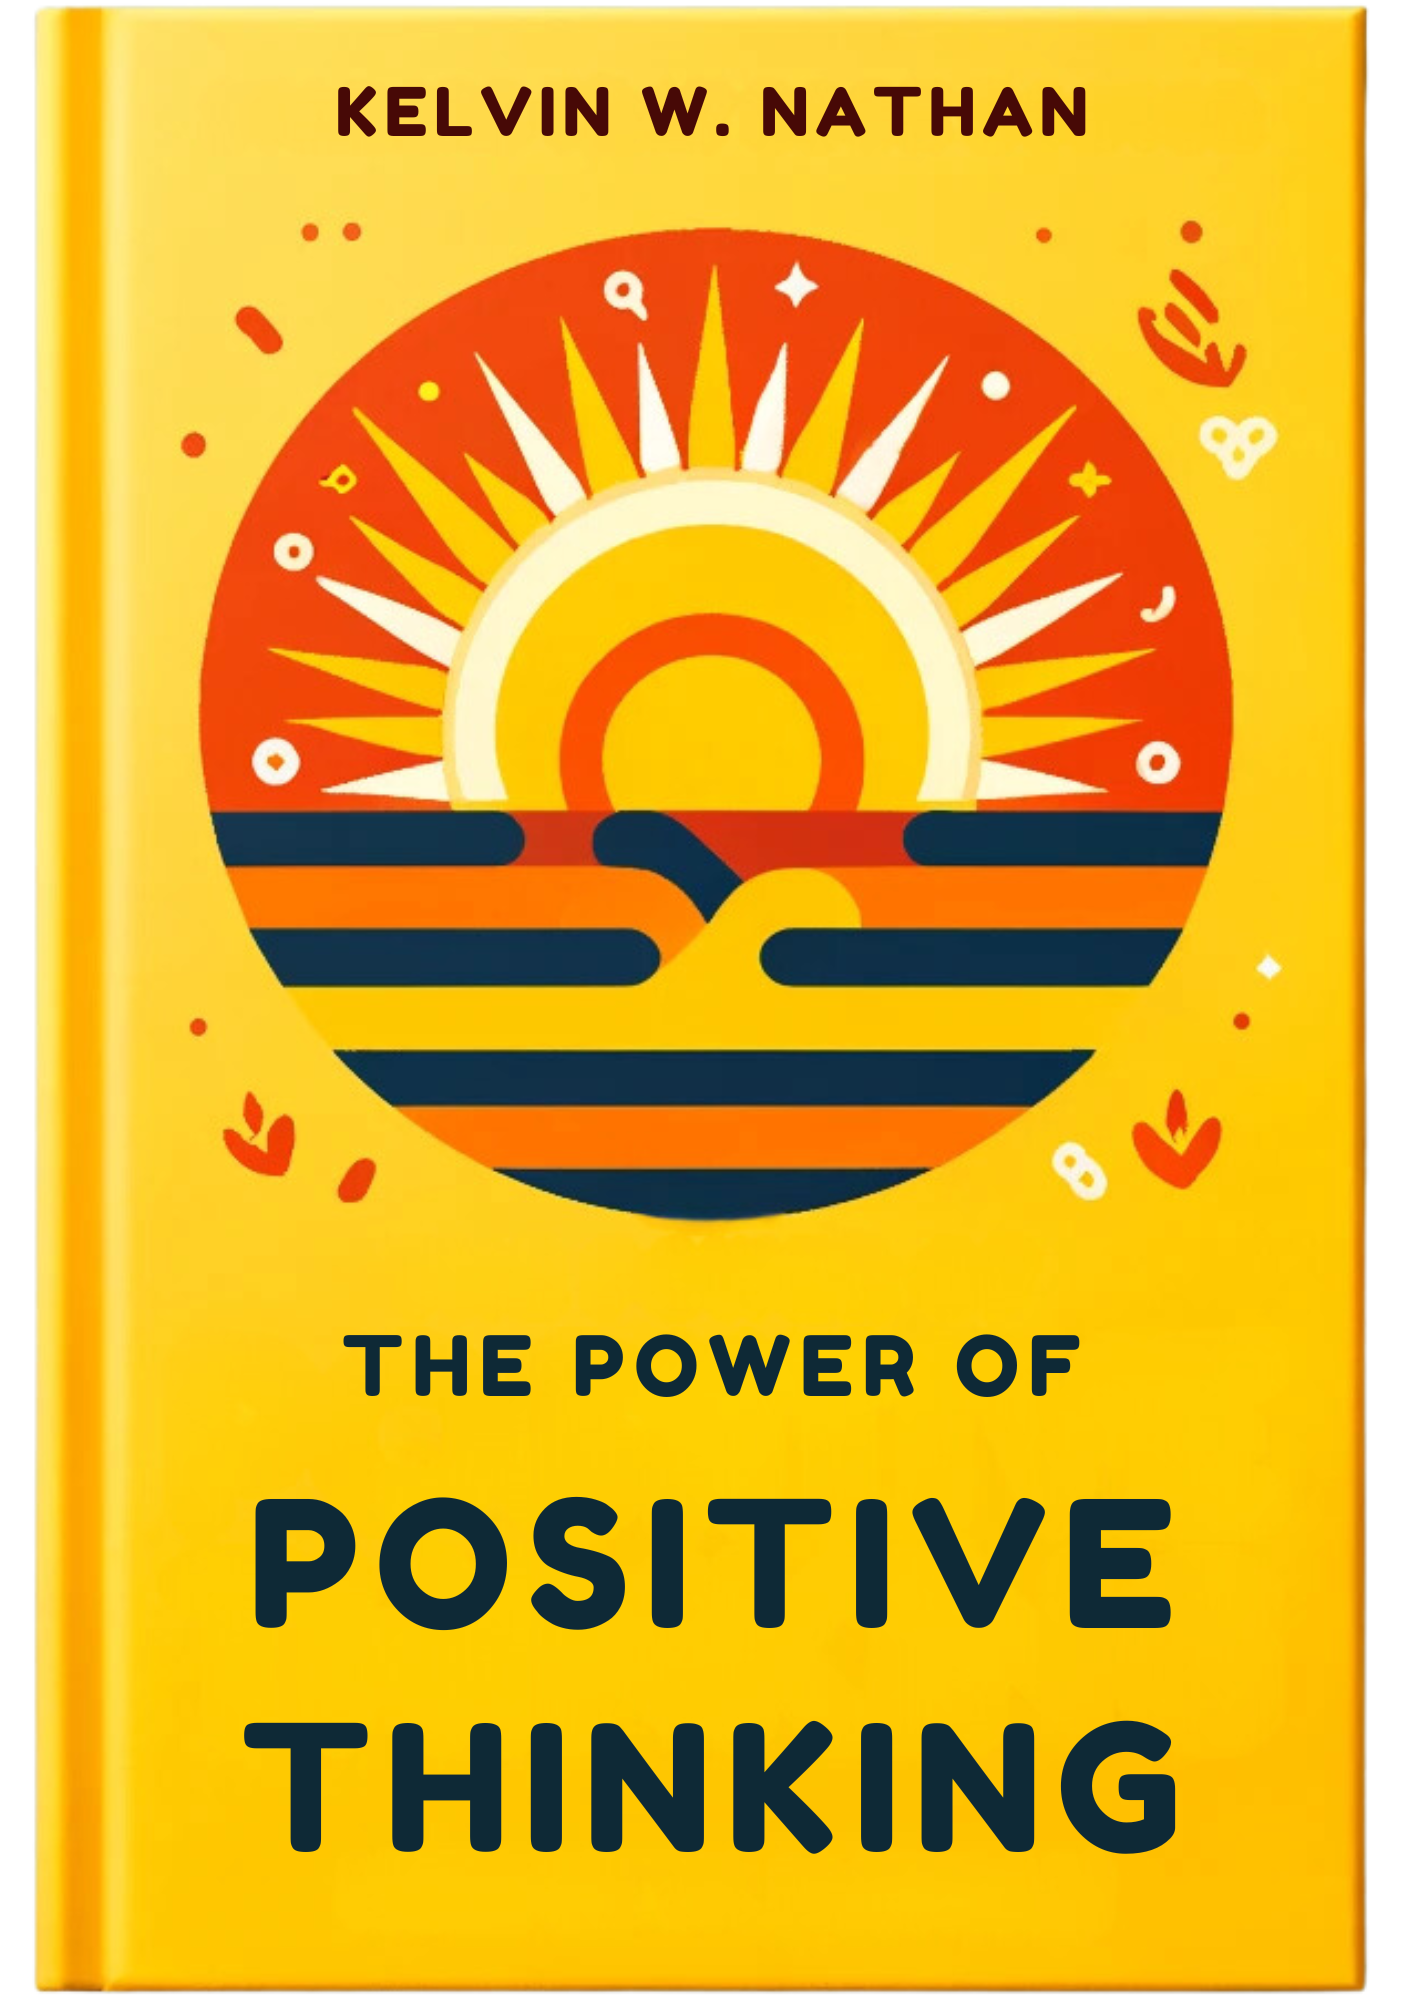 The Power of Positive Thinking: 25 Universal Rules for Living an Unstoppable Life